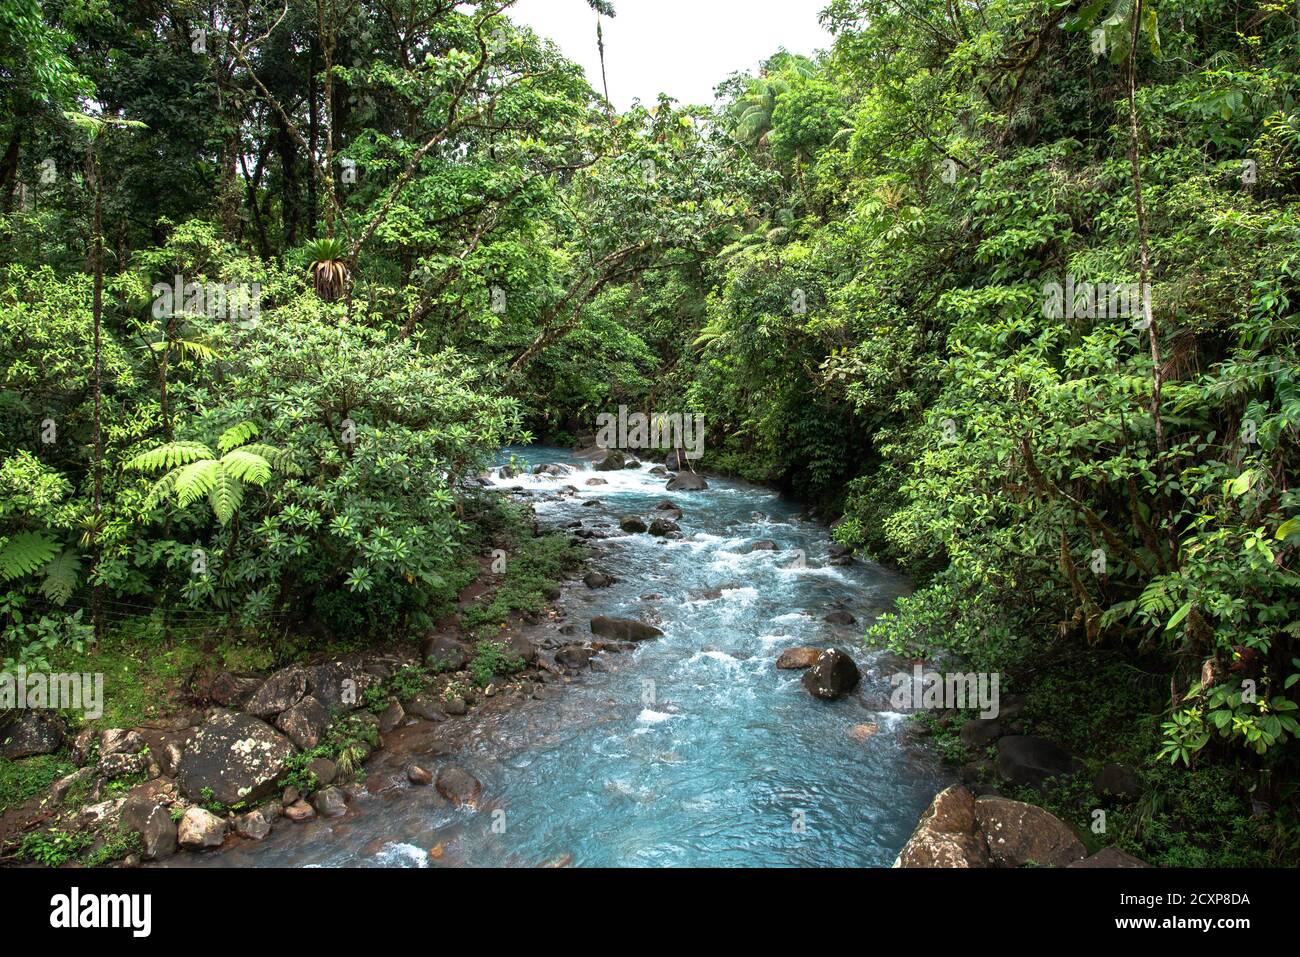 Rio Celeste, blue turquoise colored river, stream in Costa Rica in a overgrown vegetated moist wet Rainforest in Central America Stock Photo